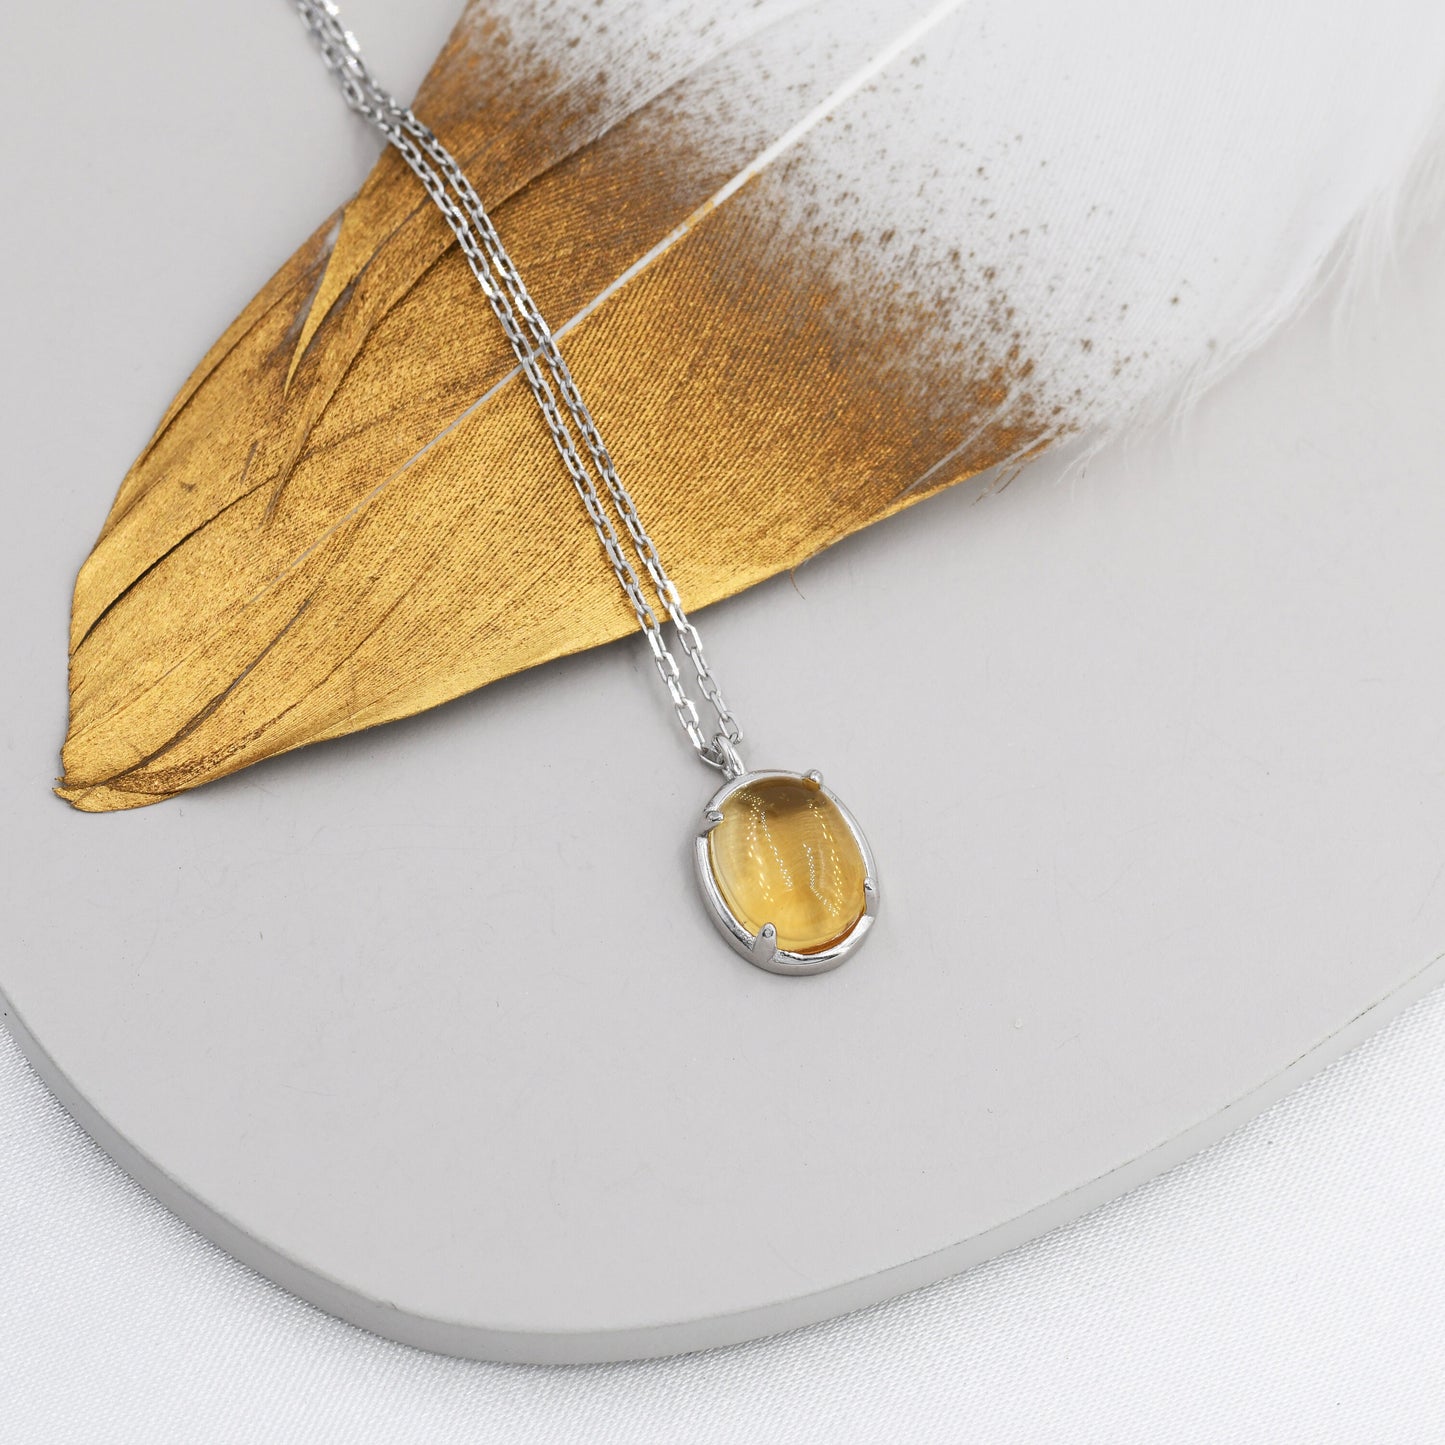 Genuine Citrine Crystal Oval Necklace in Sterling Silver, Oval Cabochon Natural Citrine Stone Necklace, November Birthstone